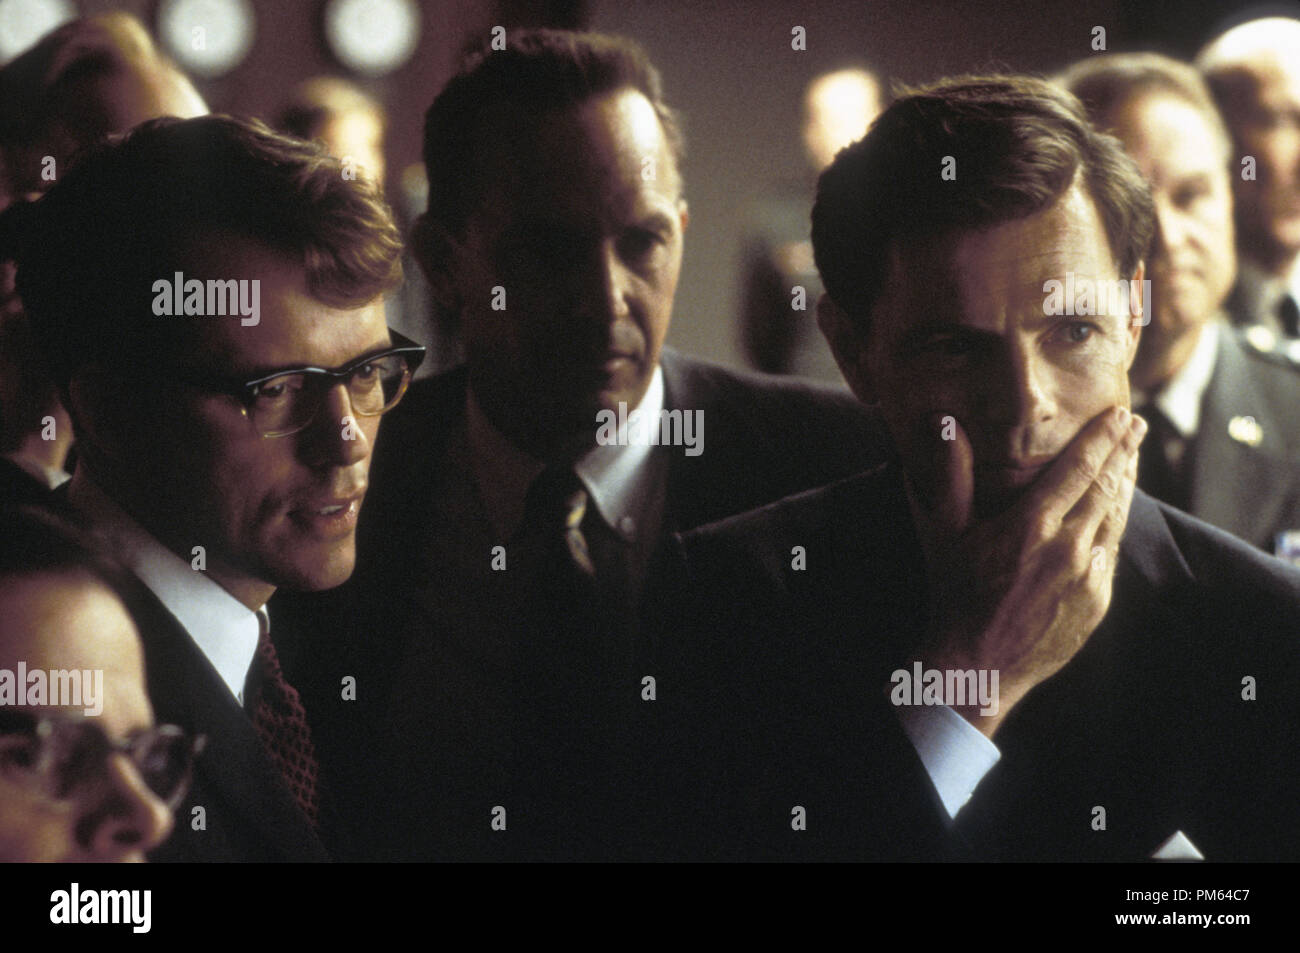 https://c8.alamy.com/comp/PM64C7/film-still-publicity-stills-from-thirteen-days-steven-culp-bruce-greenwood-kevin-costner-2000-new-line-cinema-photo-credit-ben-glass-file-reference-30846059tha-for-editorial-use-only-all-rights-reserved-PM64C7.jpg